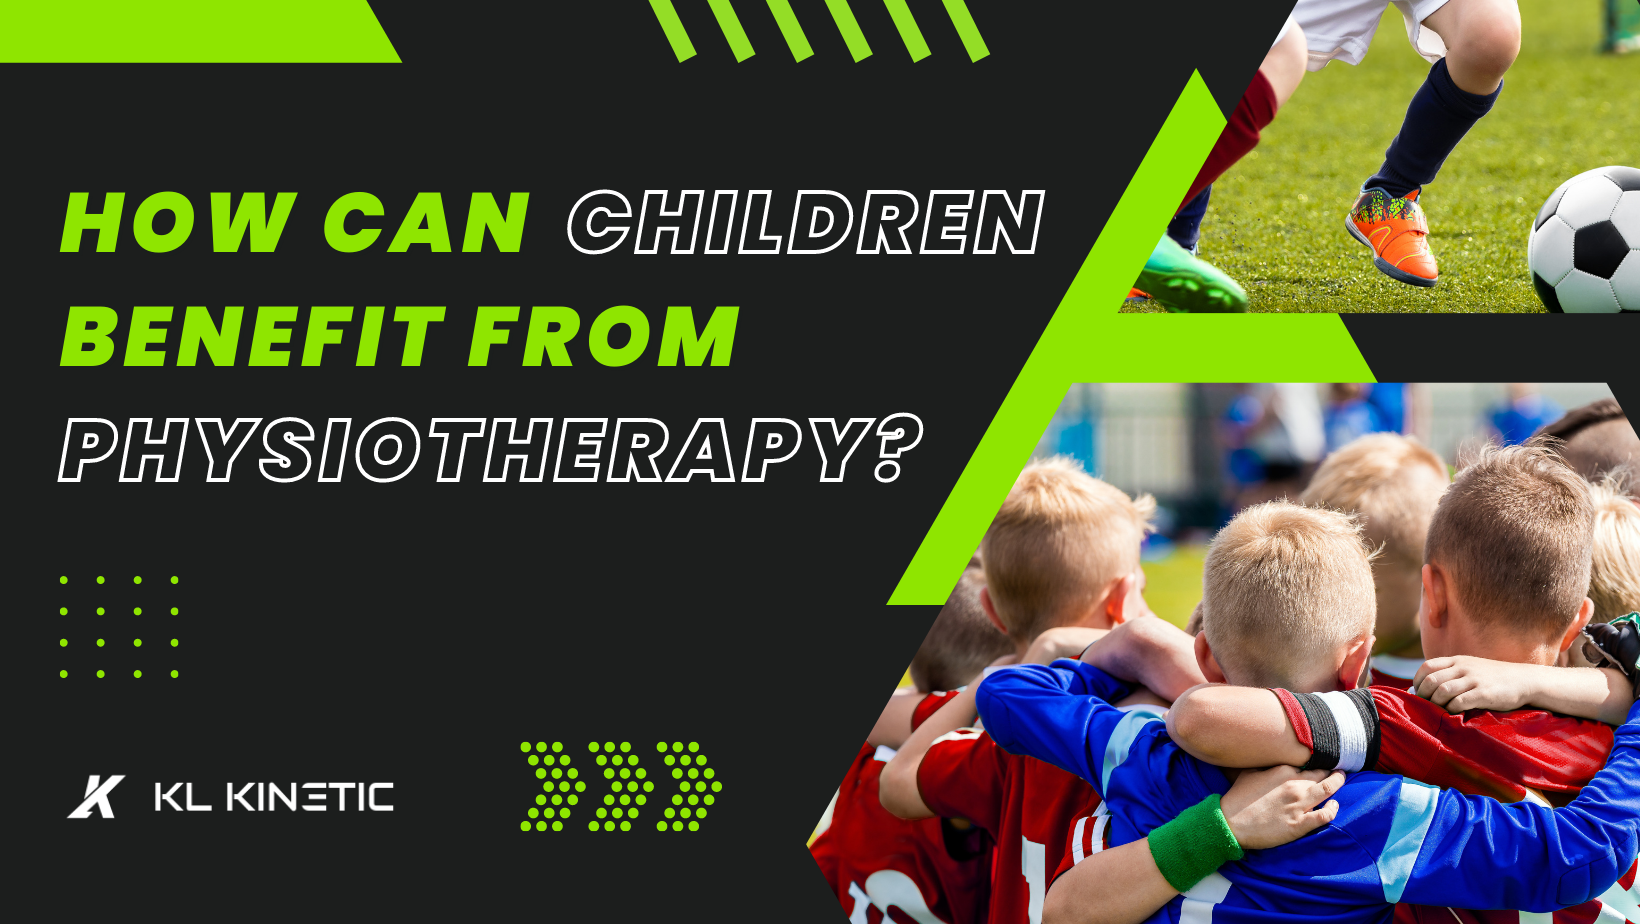 How can children benefit from physiotherapy?